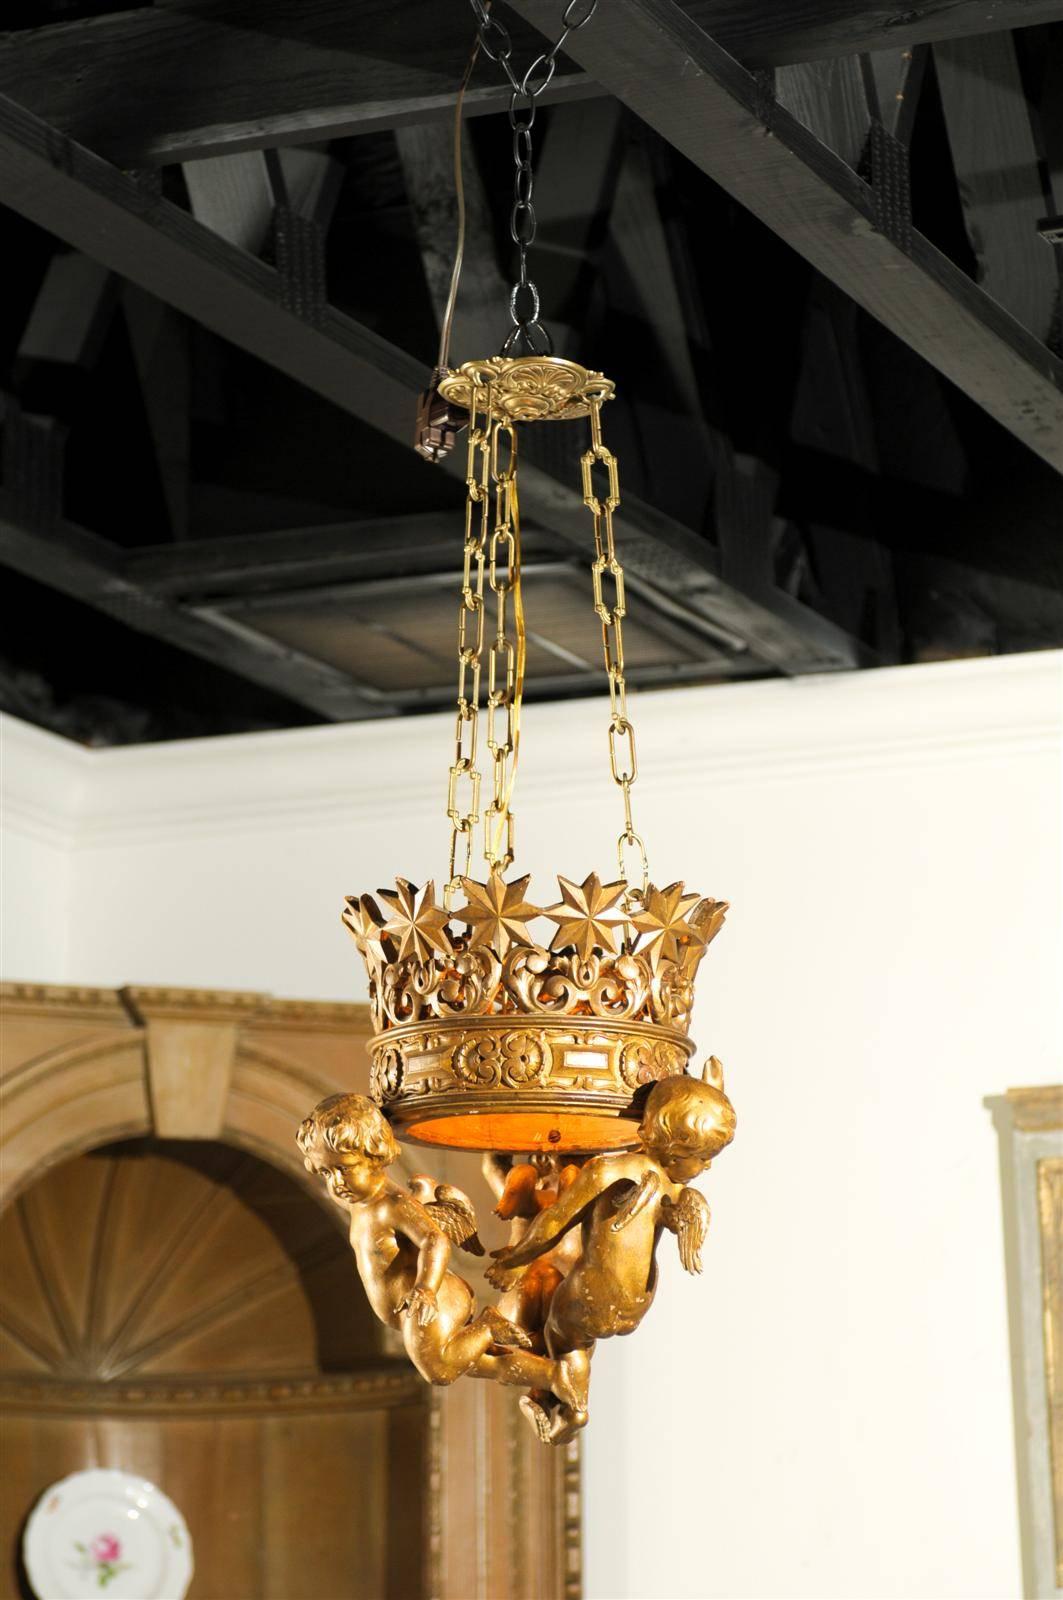 Swedish 19th century gilded wood chandelier with three cherubs supporting a gilded pierced crown.